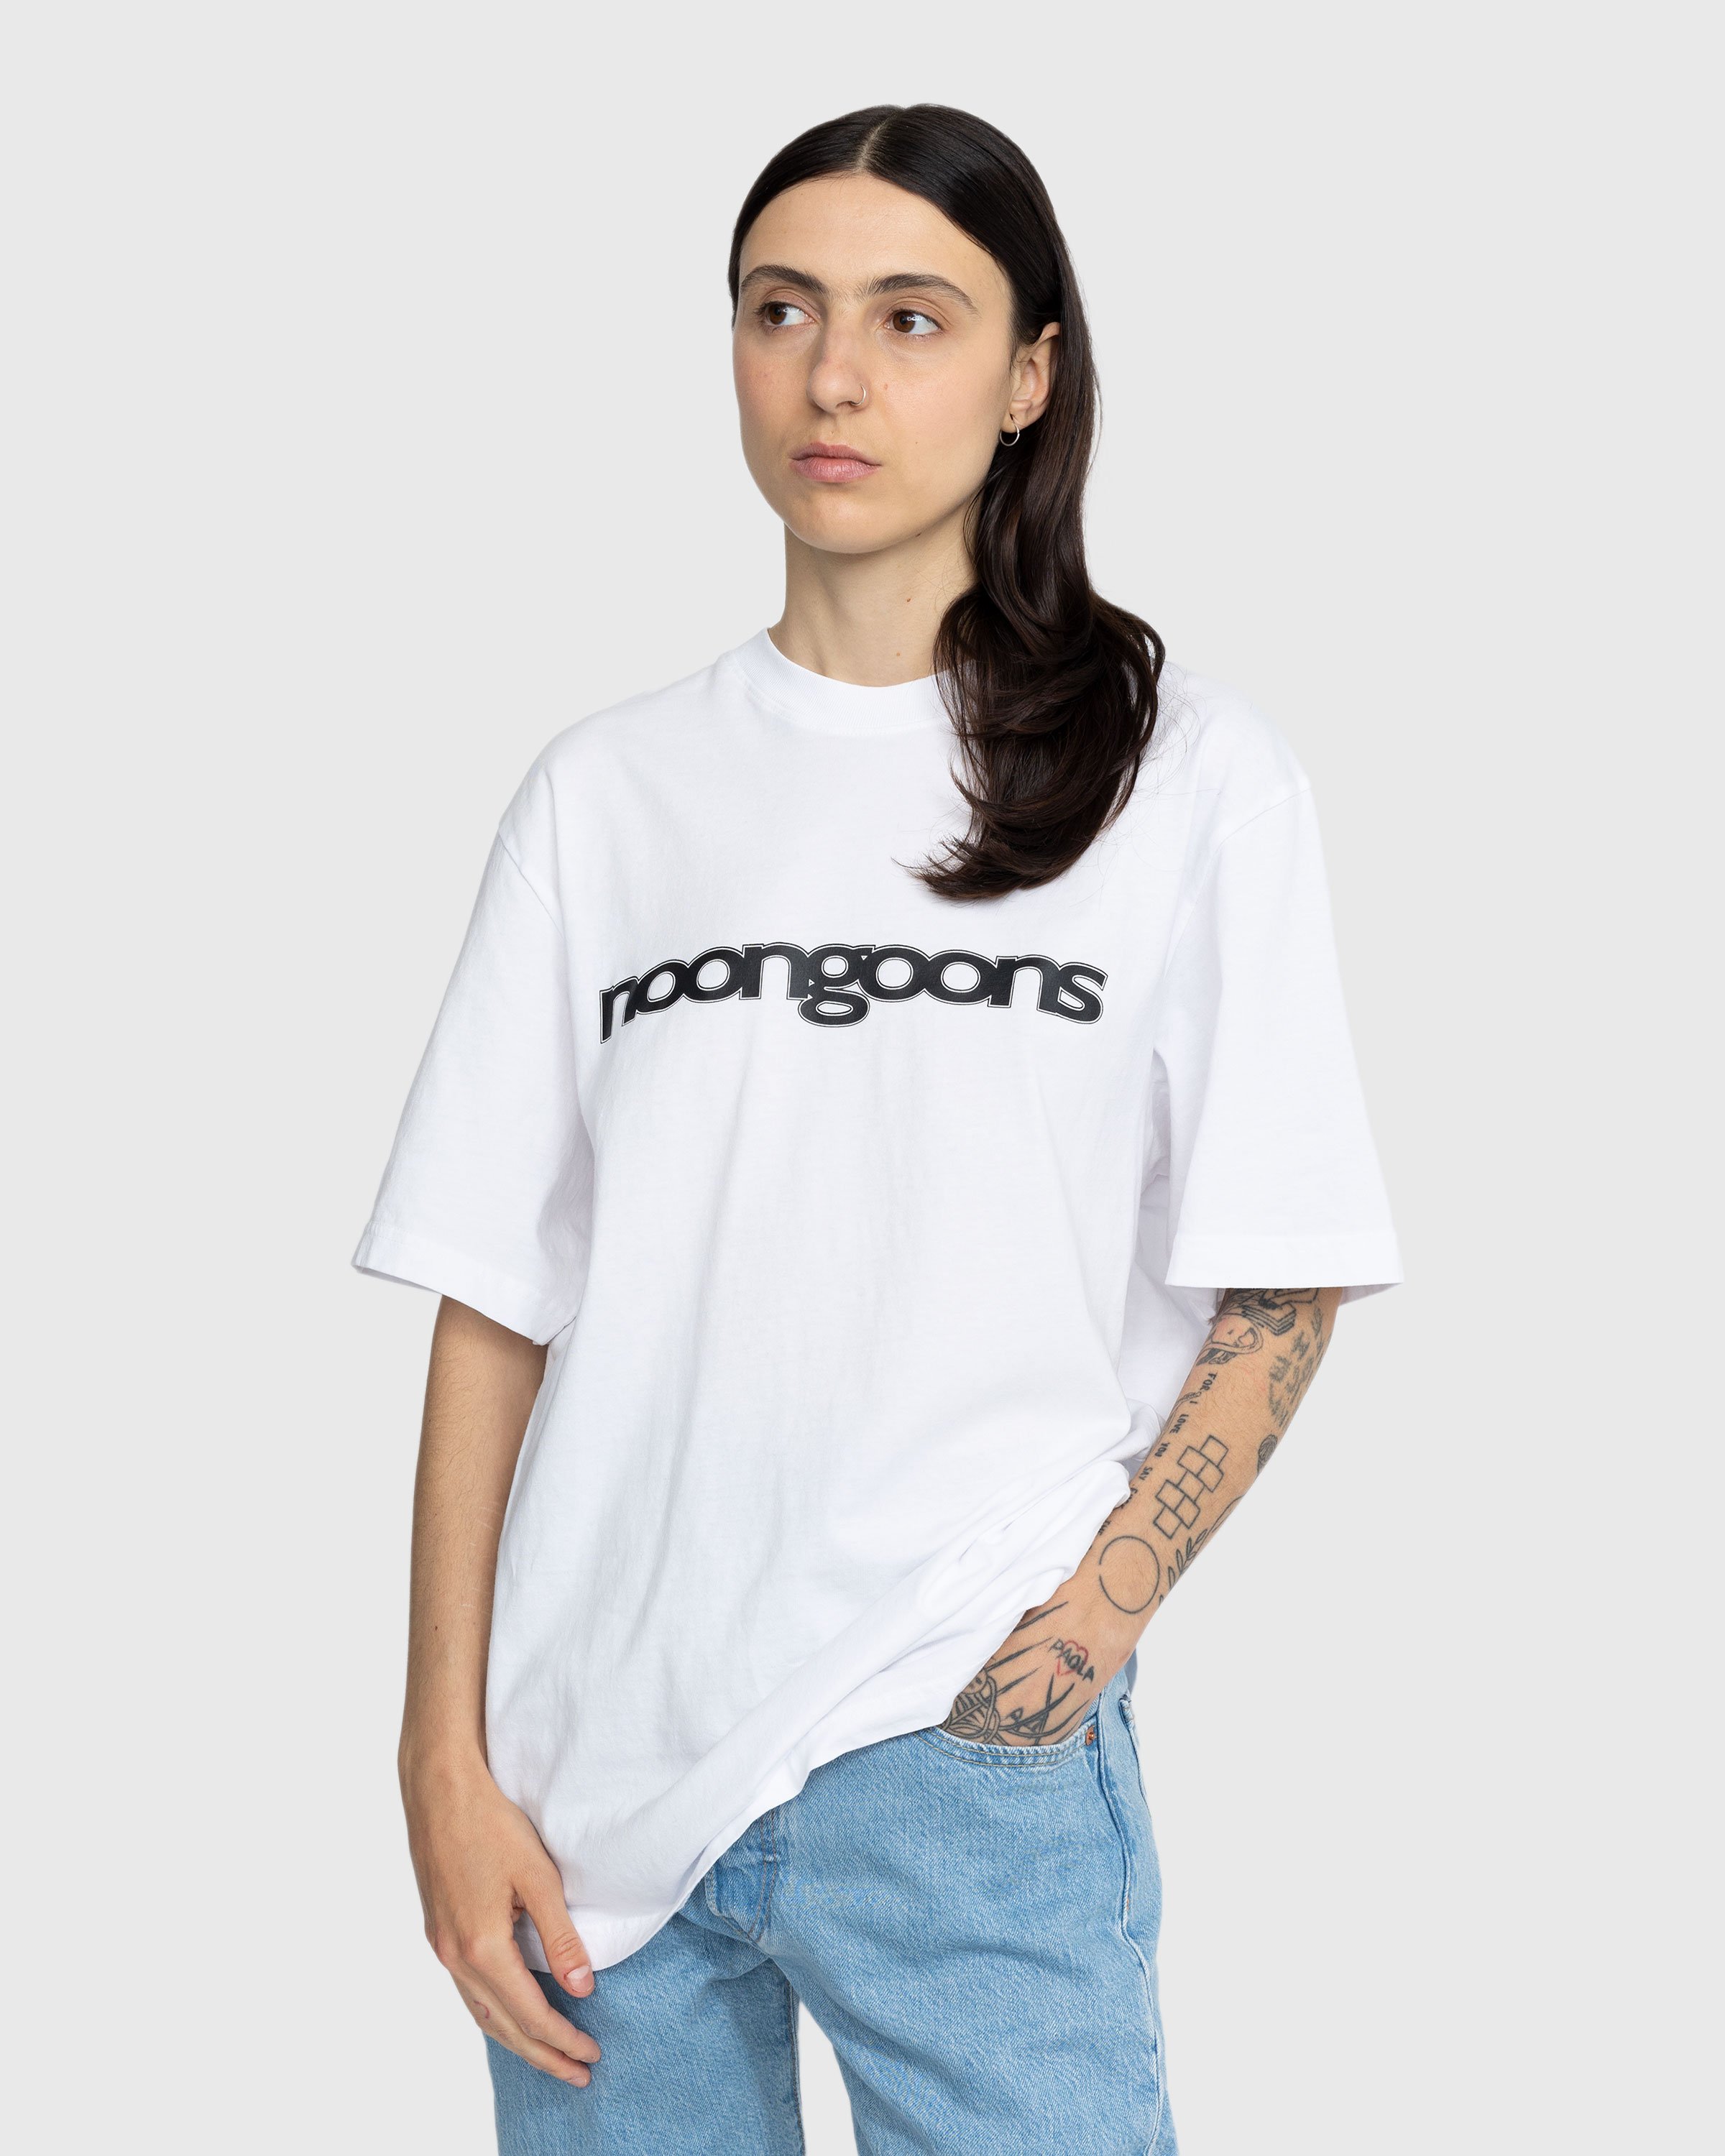 Noon Goons - Very Simple T-Shirt White - Clothing - White - Image 5